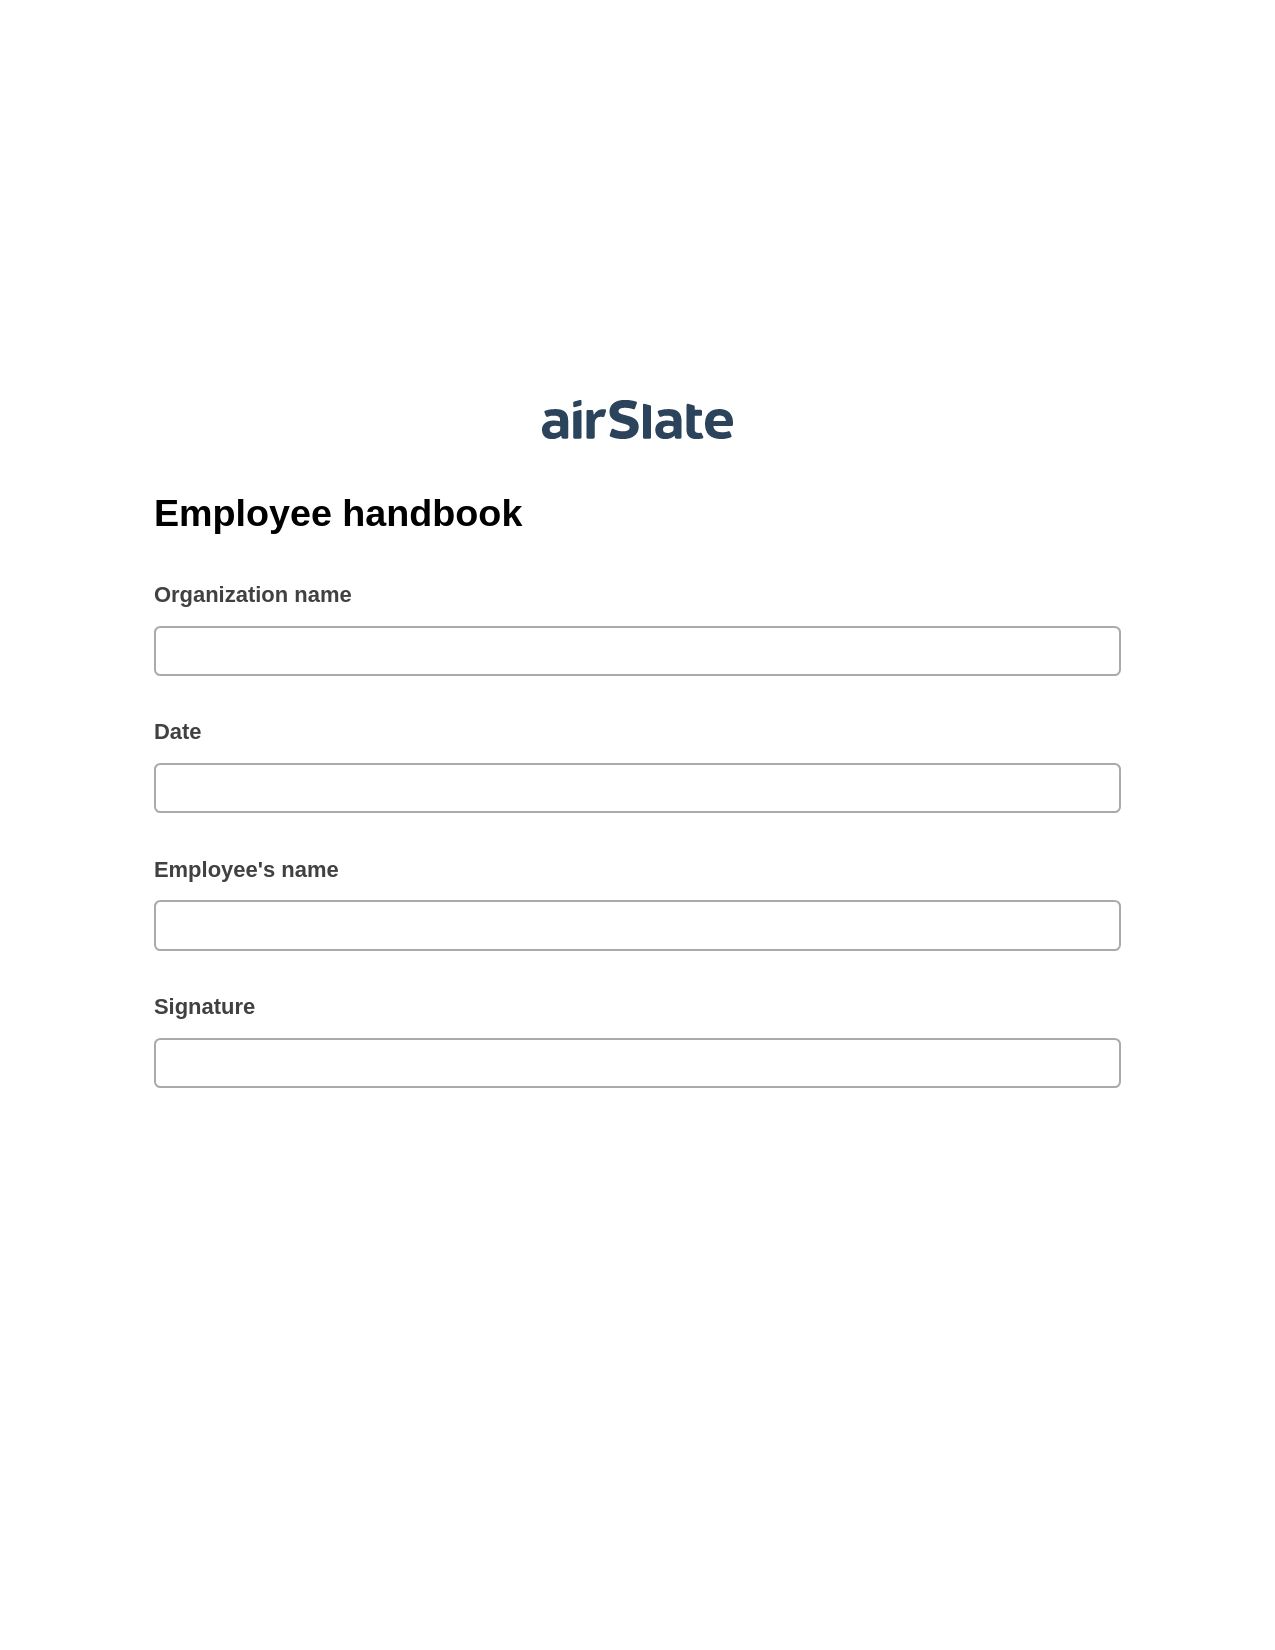 Employee handbook Pre-fill from Salesforce Record Bot, Slack Notification Bot, Export to NetSuite Record Bot